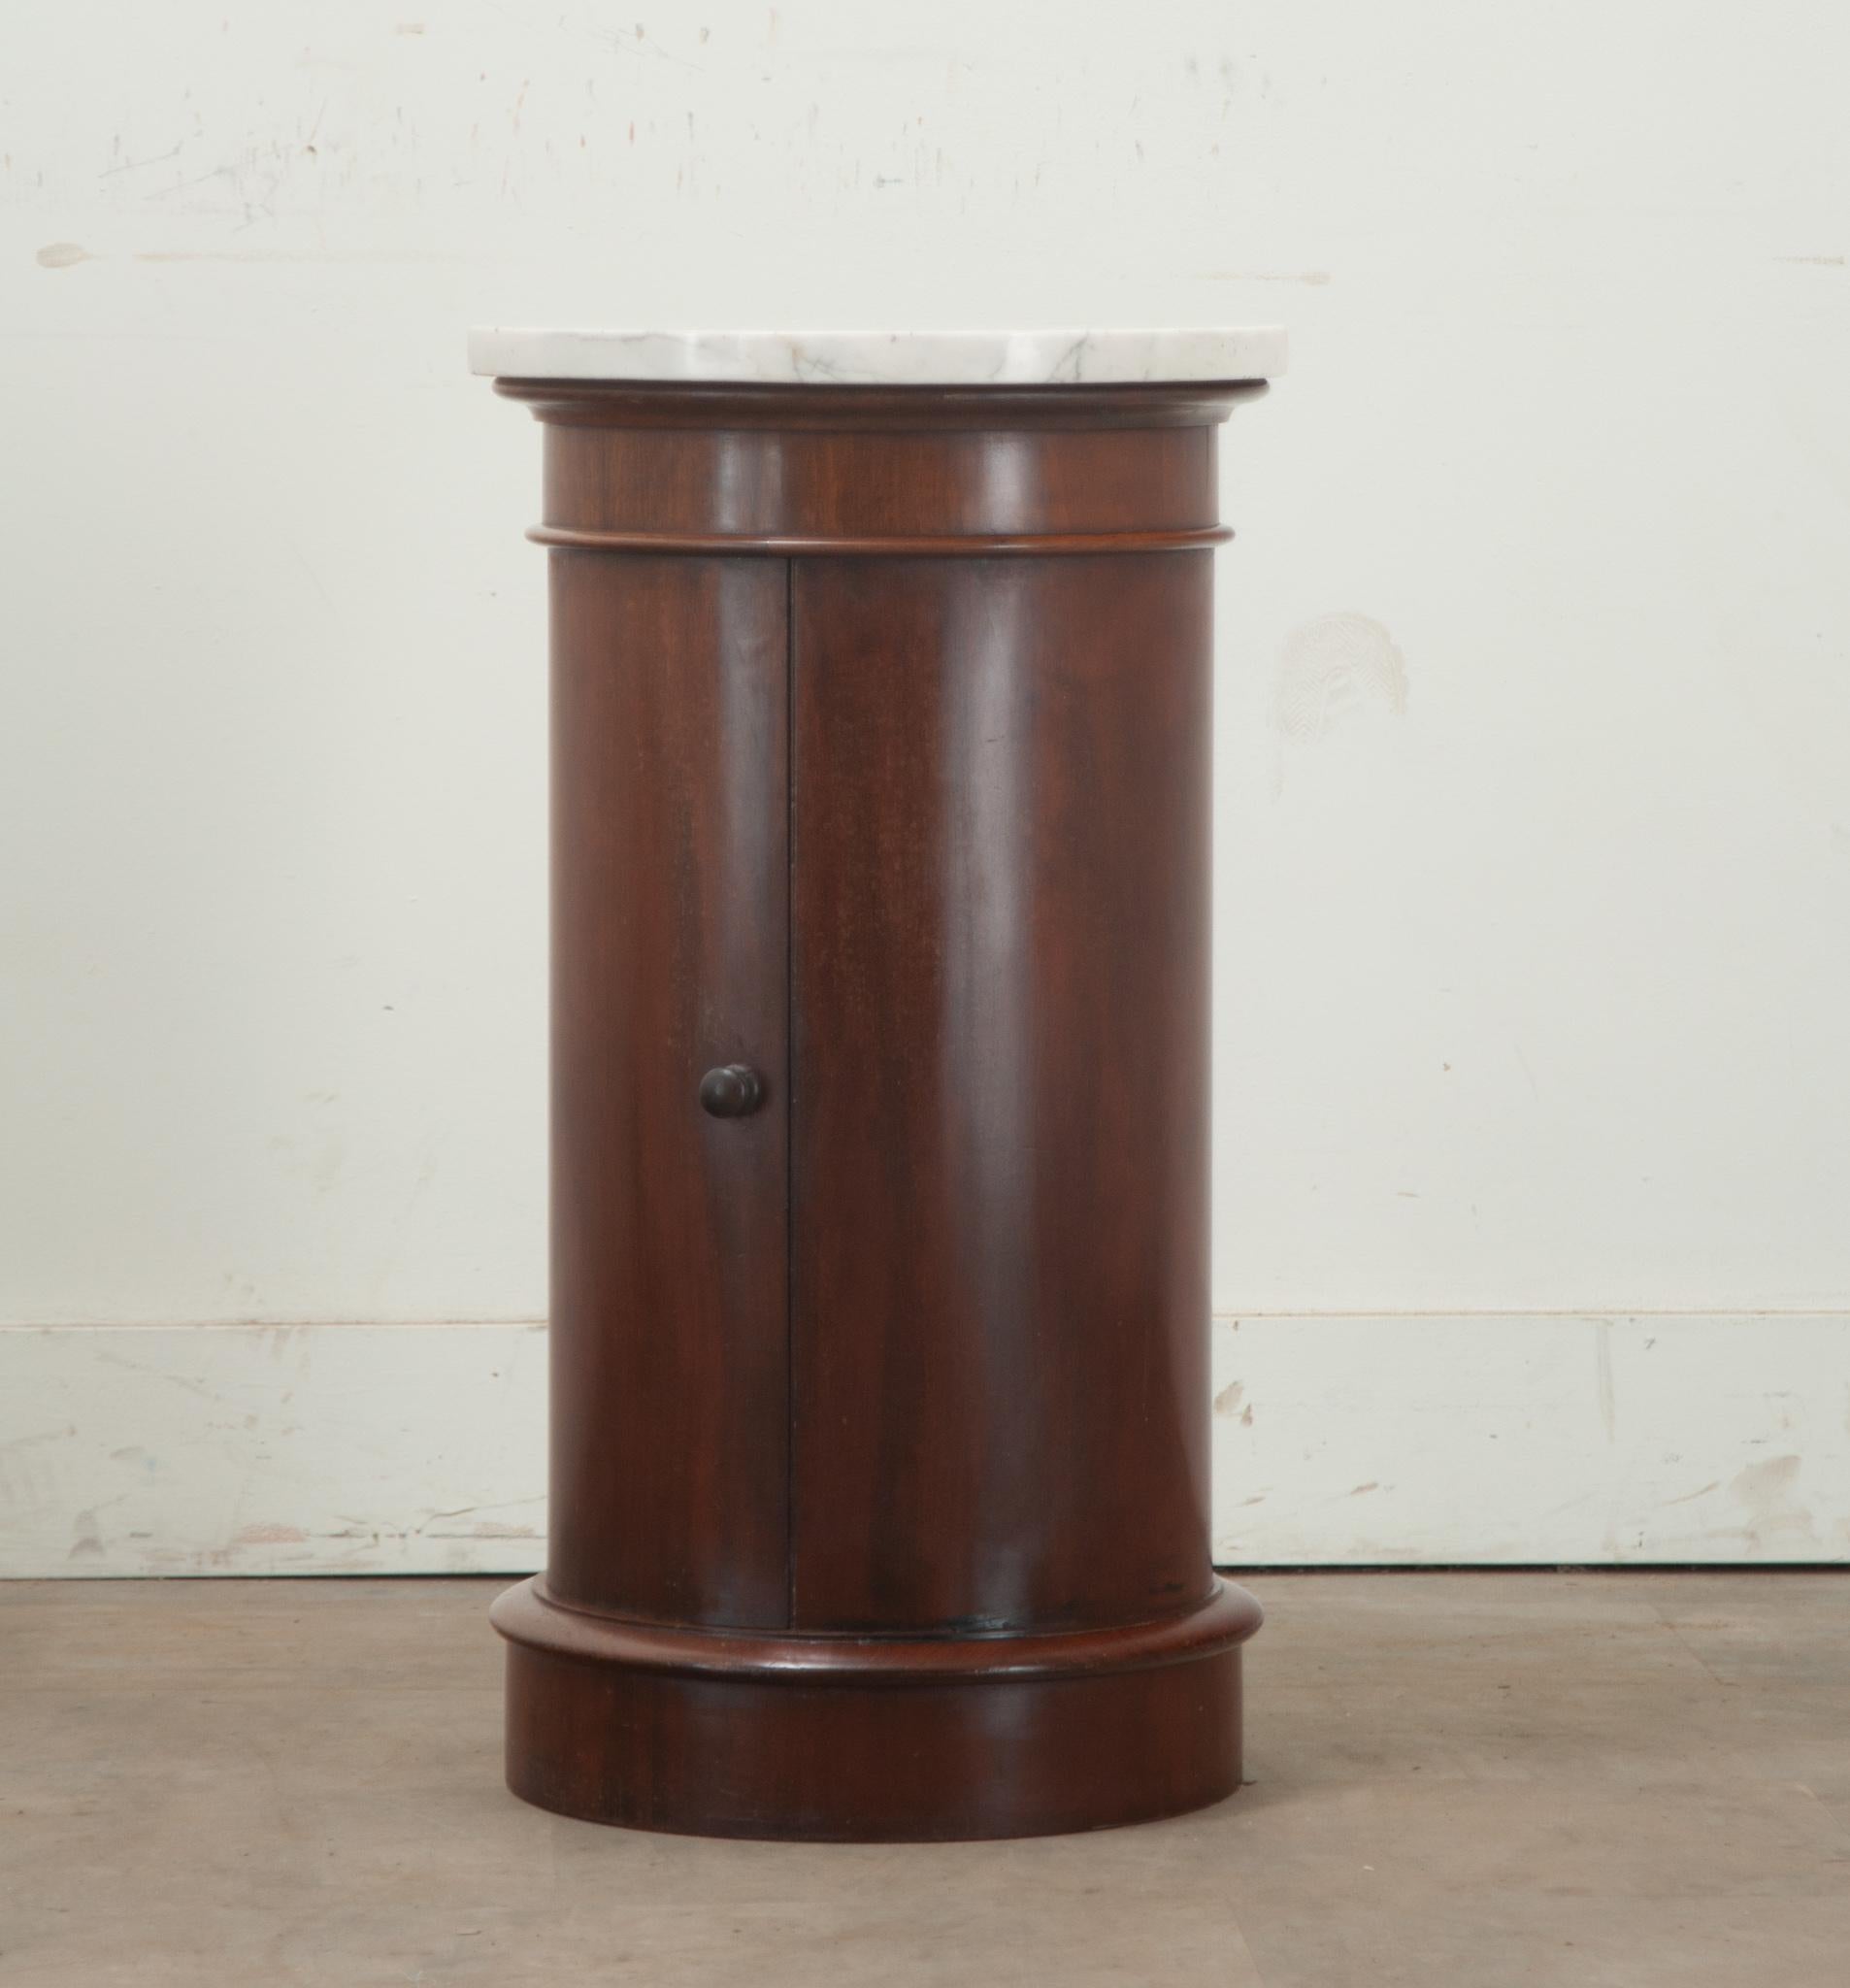 A round mahogany and marble English bedside table. This table has a white beveled marble top over a mahogany body with a door that has a turned knob and opens to reveal a single fixed circular shelf at 10 ½'' deep. The whole sits on a round plinth